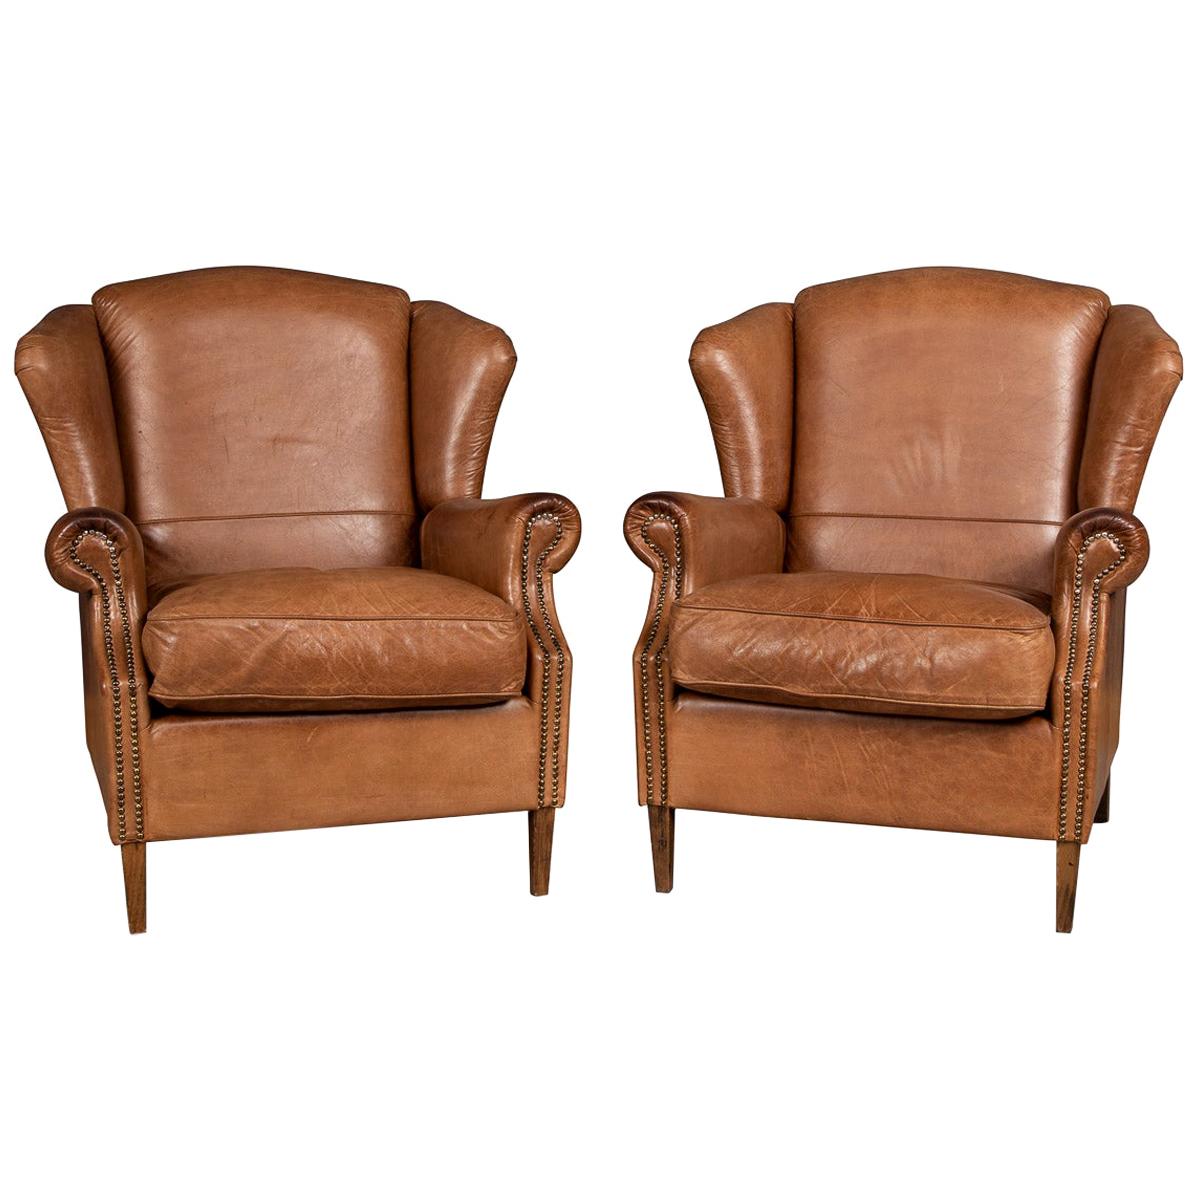 20th Century Pair Of Dutch Leather Wing Back Armchairs c.1970